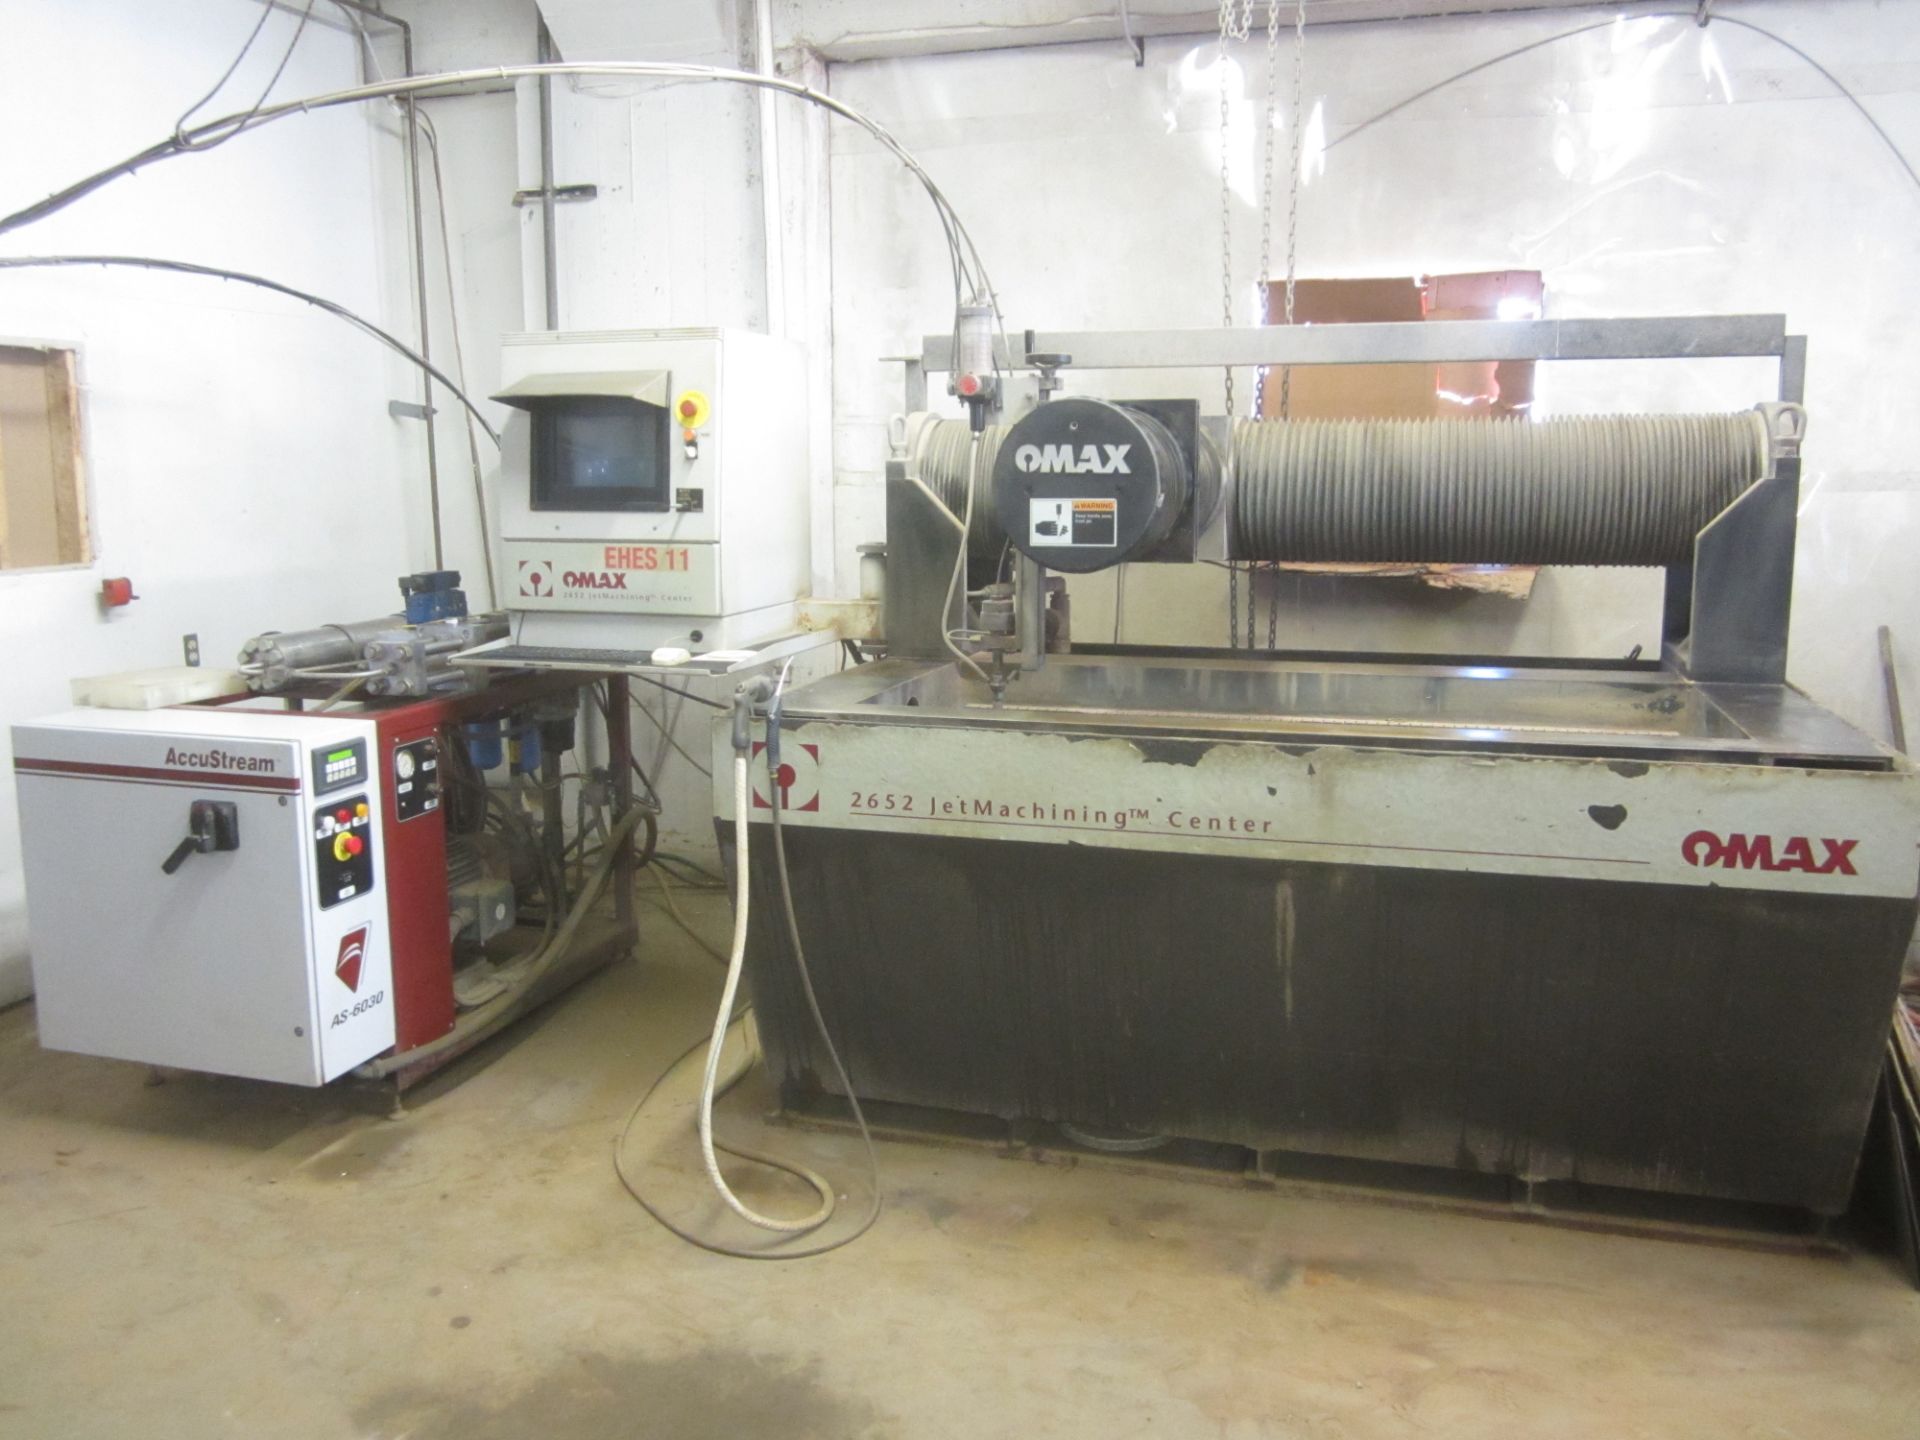 Omax Model 2652 Water Jet Machining Center, s/n A511535, with Accustream Model AS-6030, 60,000 PSI